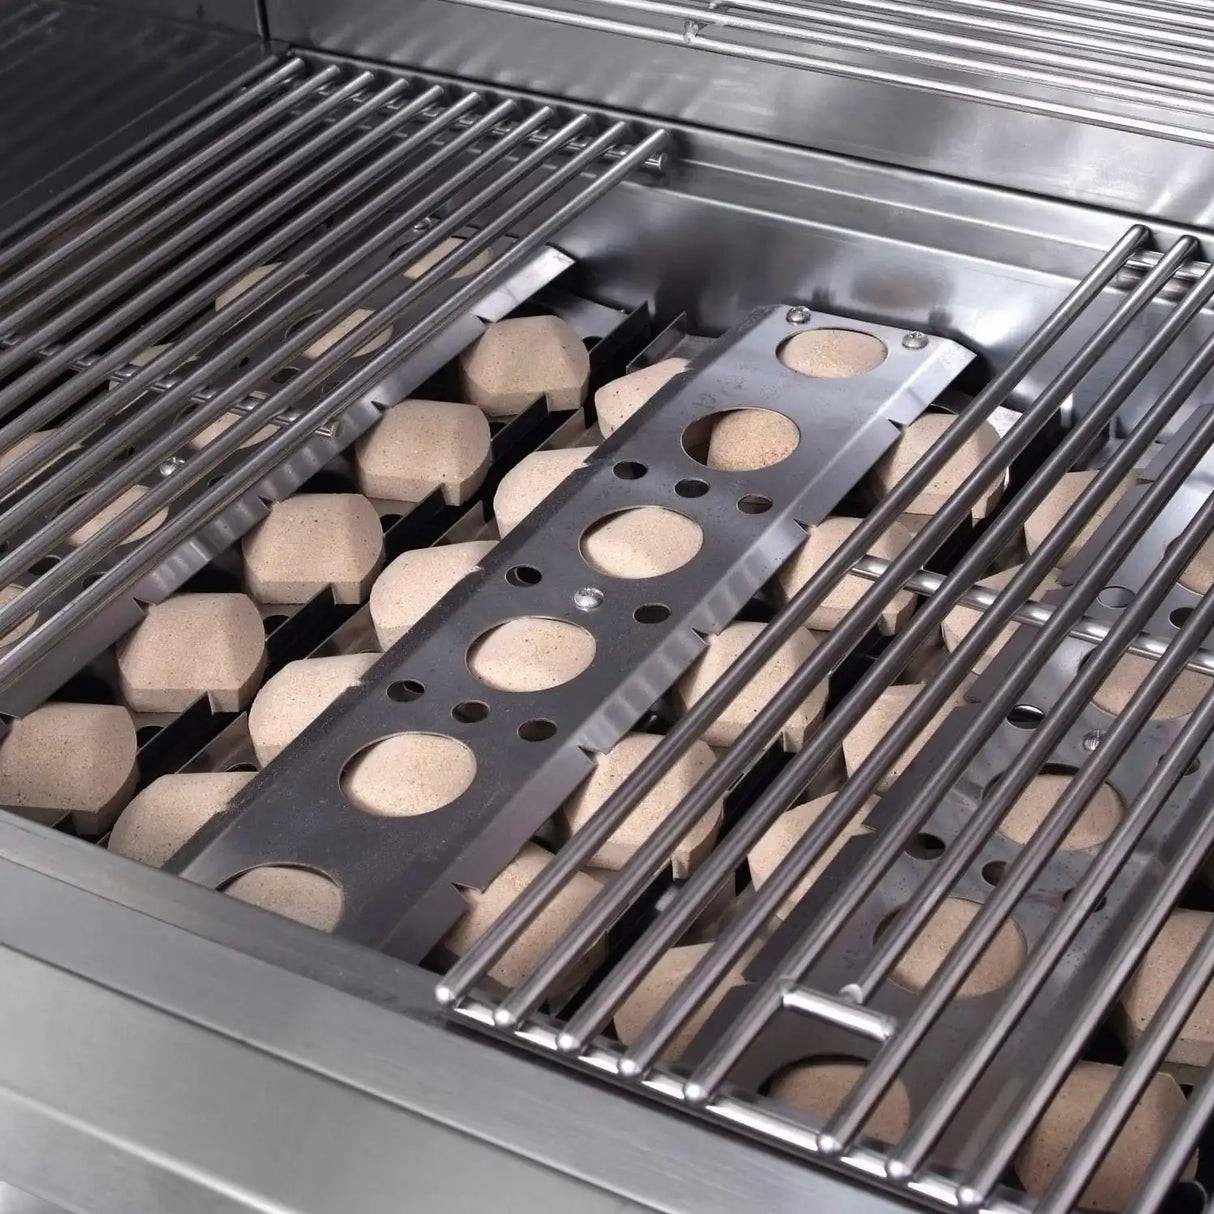 Ceramic Briquets below the grill grates on the RCS 40-Inch Premier Gas Grill, these provide strong even heat across the grilling surface